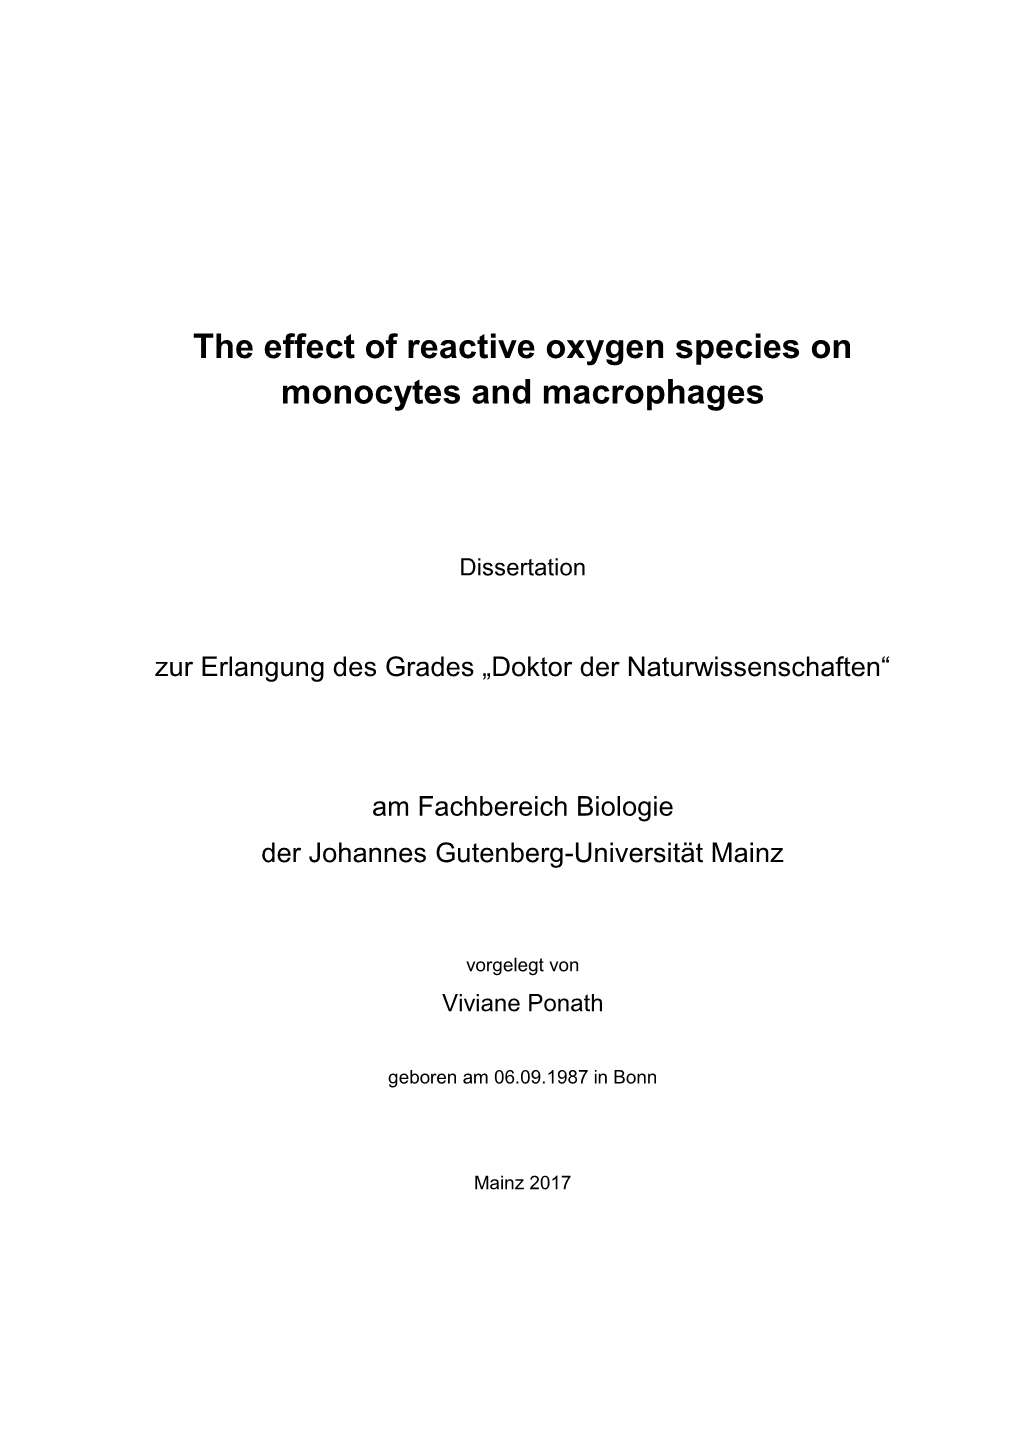 The Effect of Reactive Oxygen Species on Monocytes and Macrophages